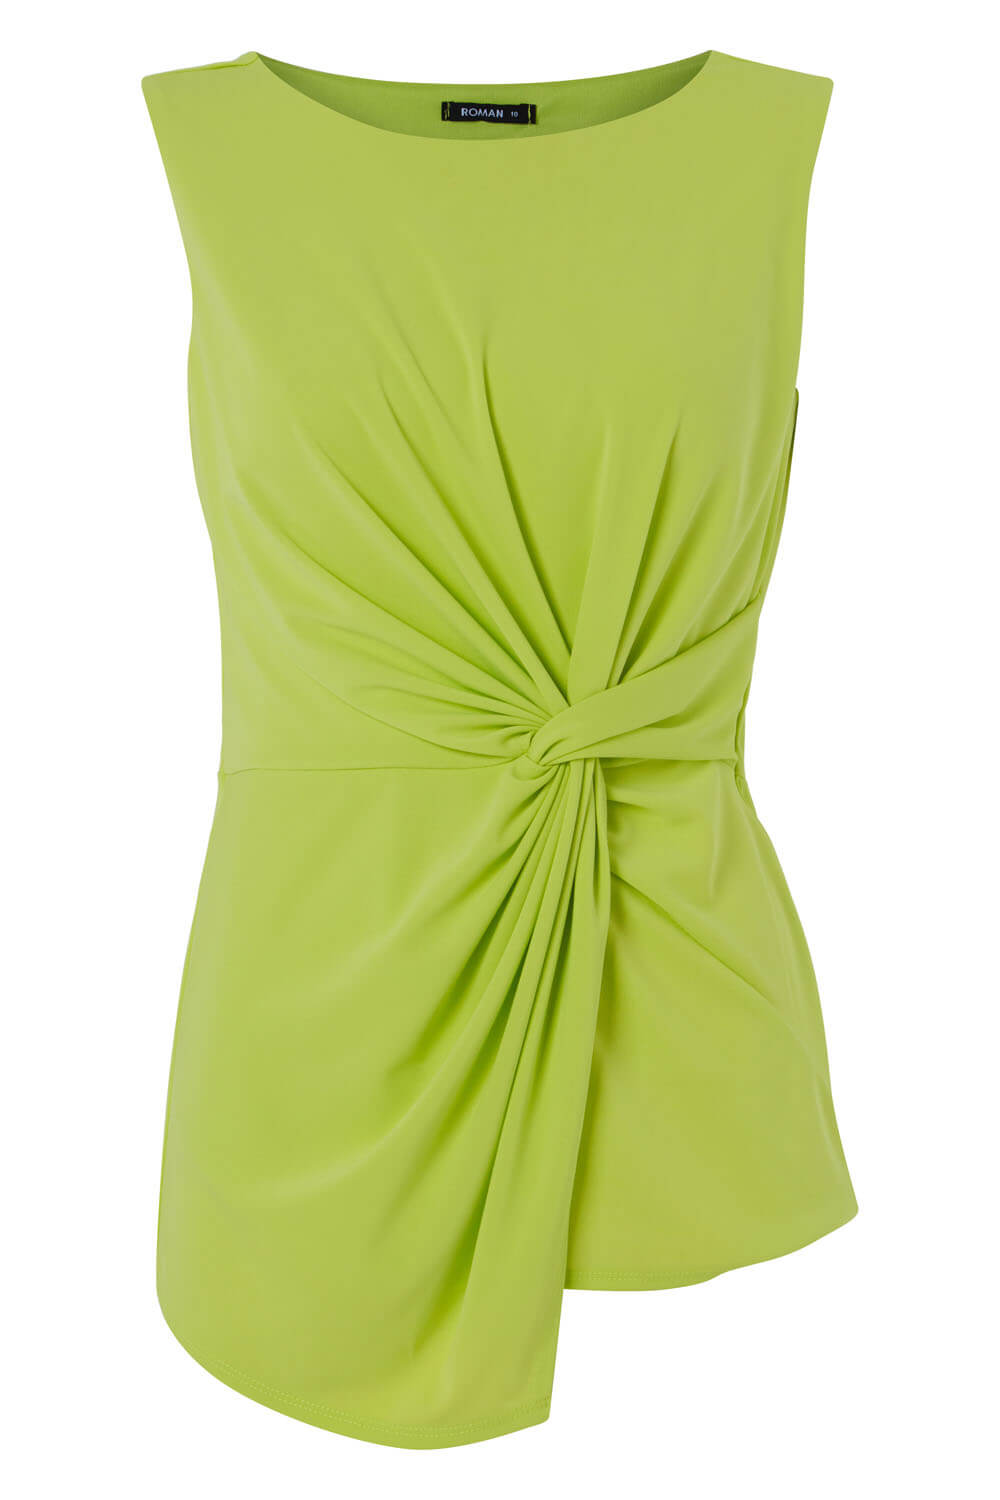 Lime Sleeveless Knot Front Top , Image 4 of 8